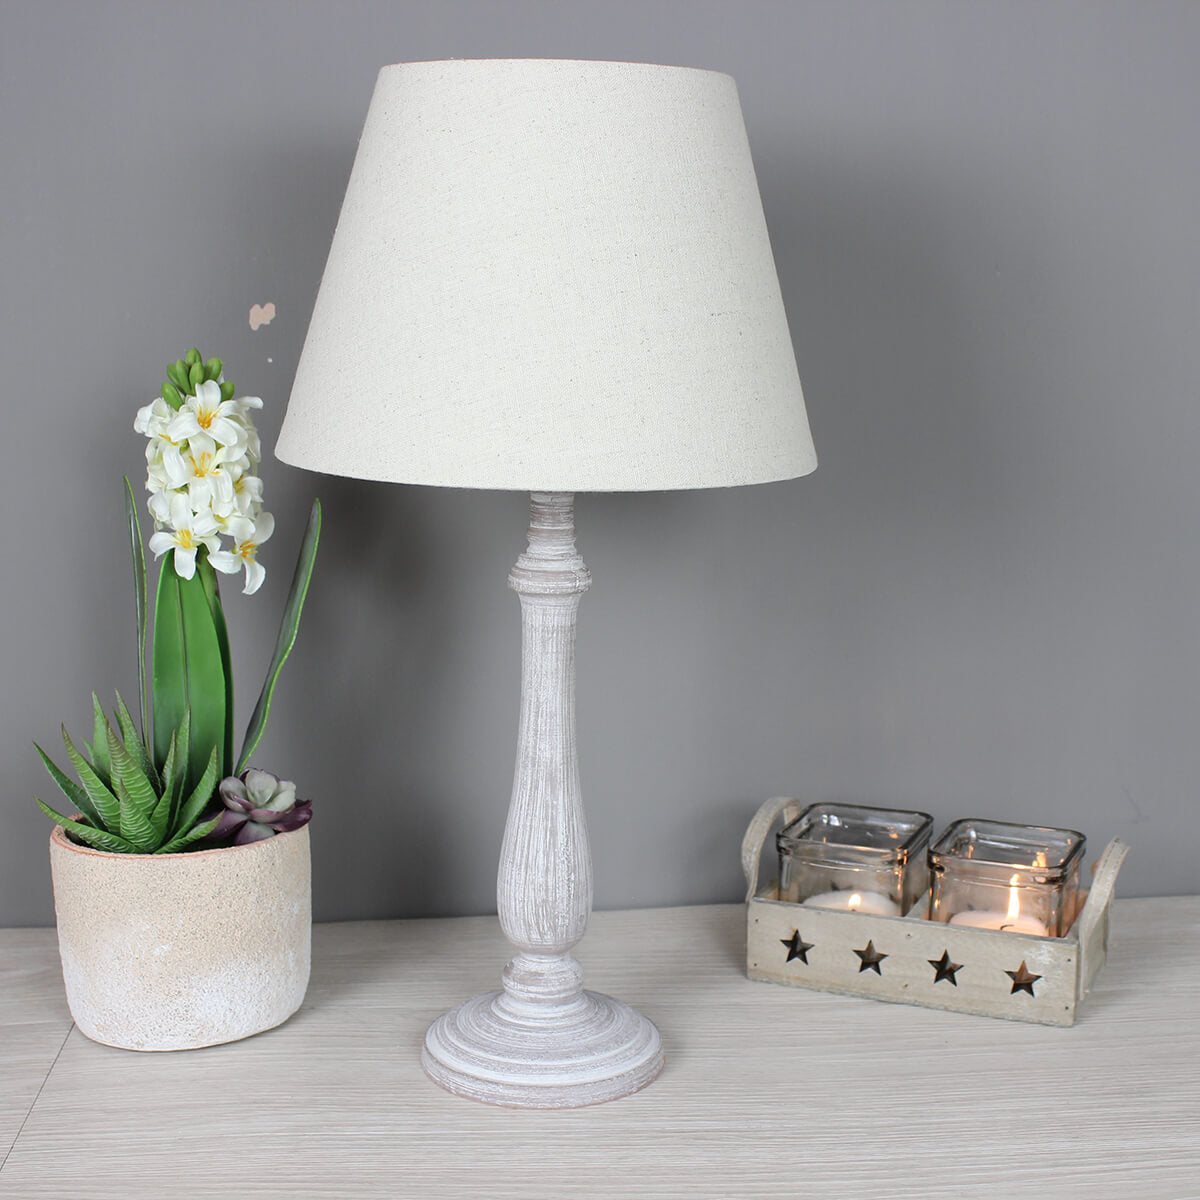 Teos Table Lamp